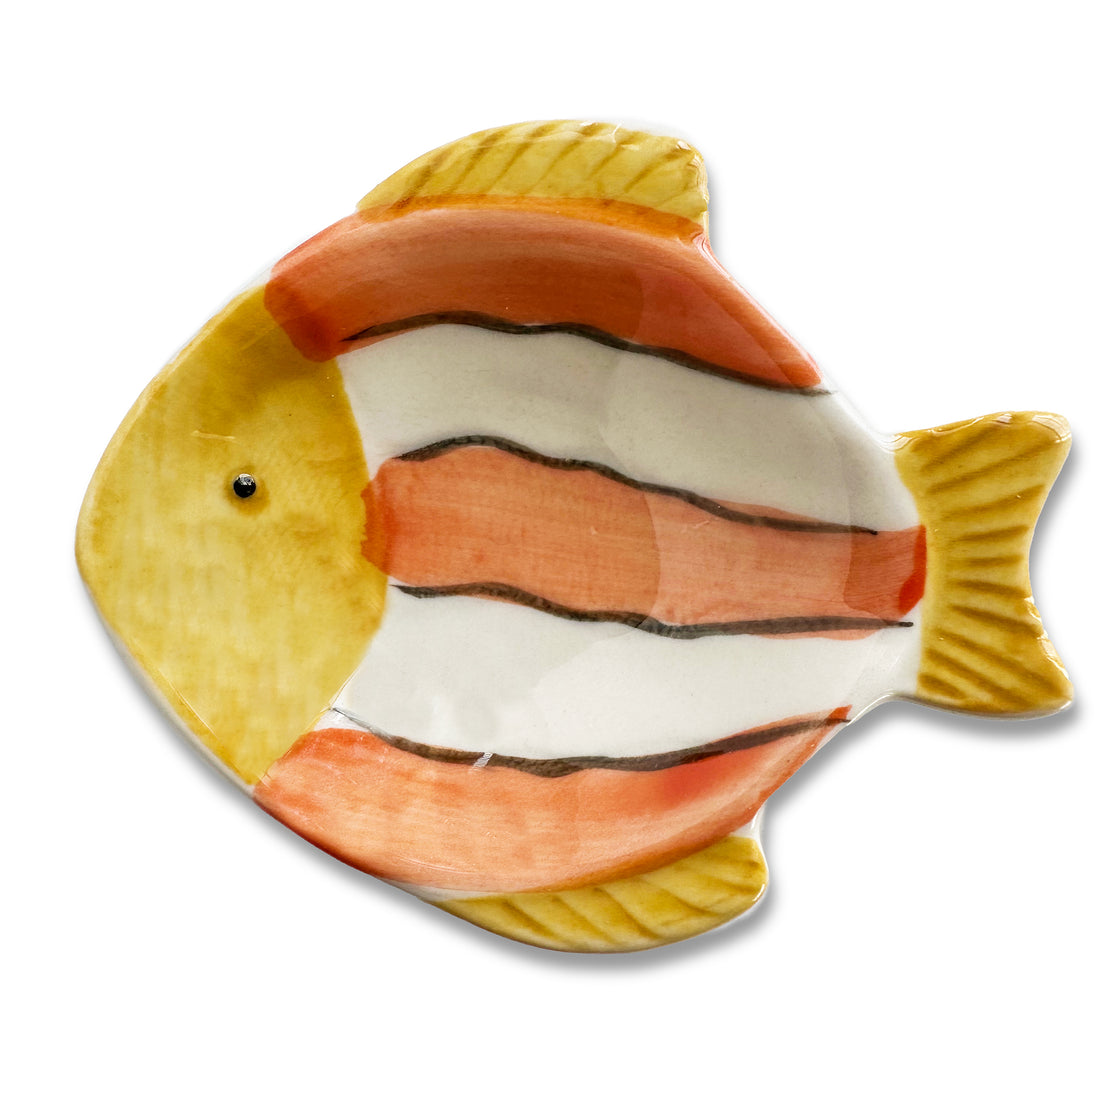  Vibrant Mini Fish Plates in yellow and orange, with cute eye by rengora